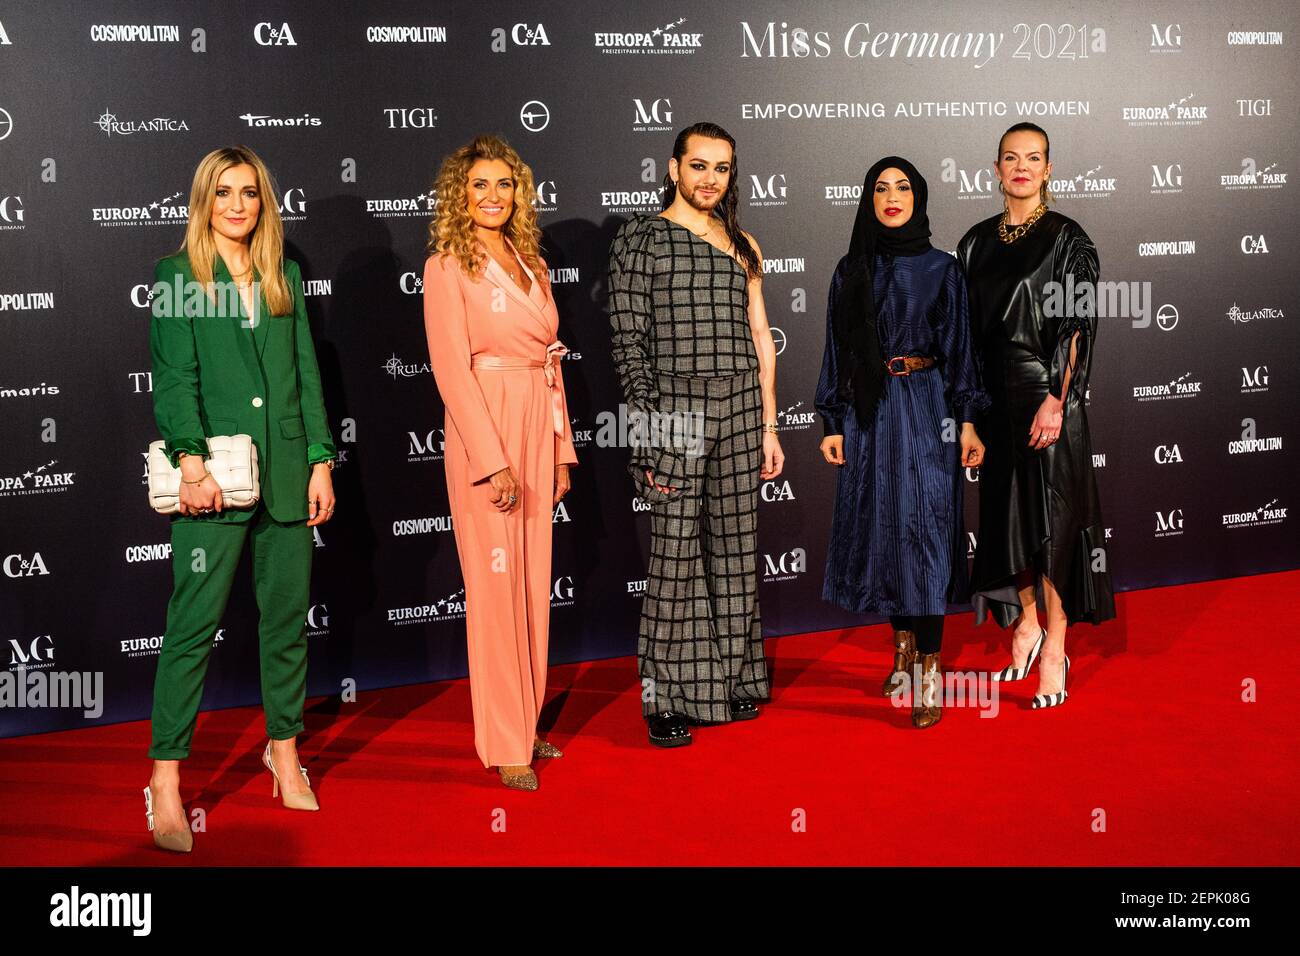 Rust, Germany. 27th Feb, 2021. The jury of the final of Miss Germany 2021, (from left) Karo Kauer, Dagmar Wöhrl, Riccardo Simonetti, Zeina Nassar and Lara Gonschorowksi stands on the red carpet in the run-up to the event. 16 candidates from all German states will face the predominantly female jury to elect Miss Germany 2021, with the motto #EmpoweringAuthenticWomen. According to the organizers, the competition is no longer primarily about beauty, but about the ability to motivate others and send an individual message. Credit: Philipp von Ditfurth/dpa/Alamy Live News Stock Photo